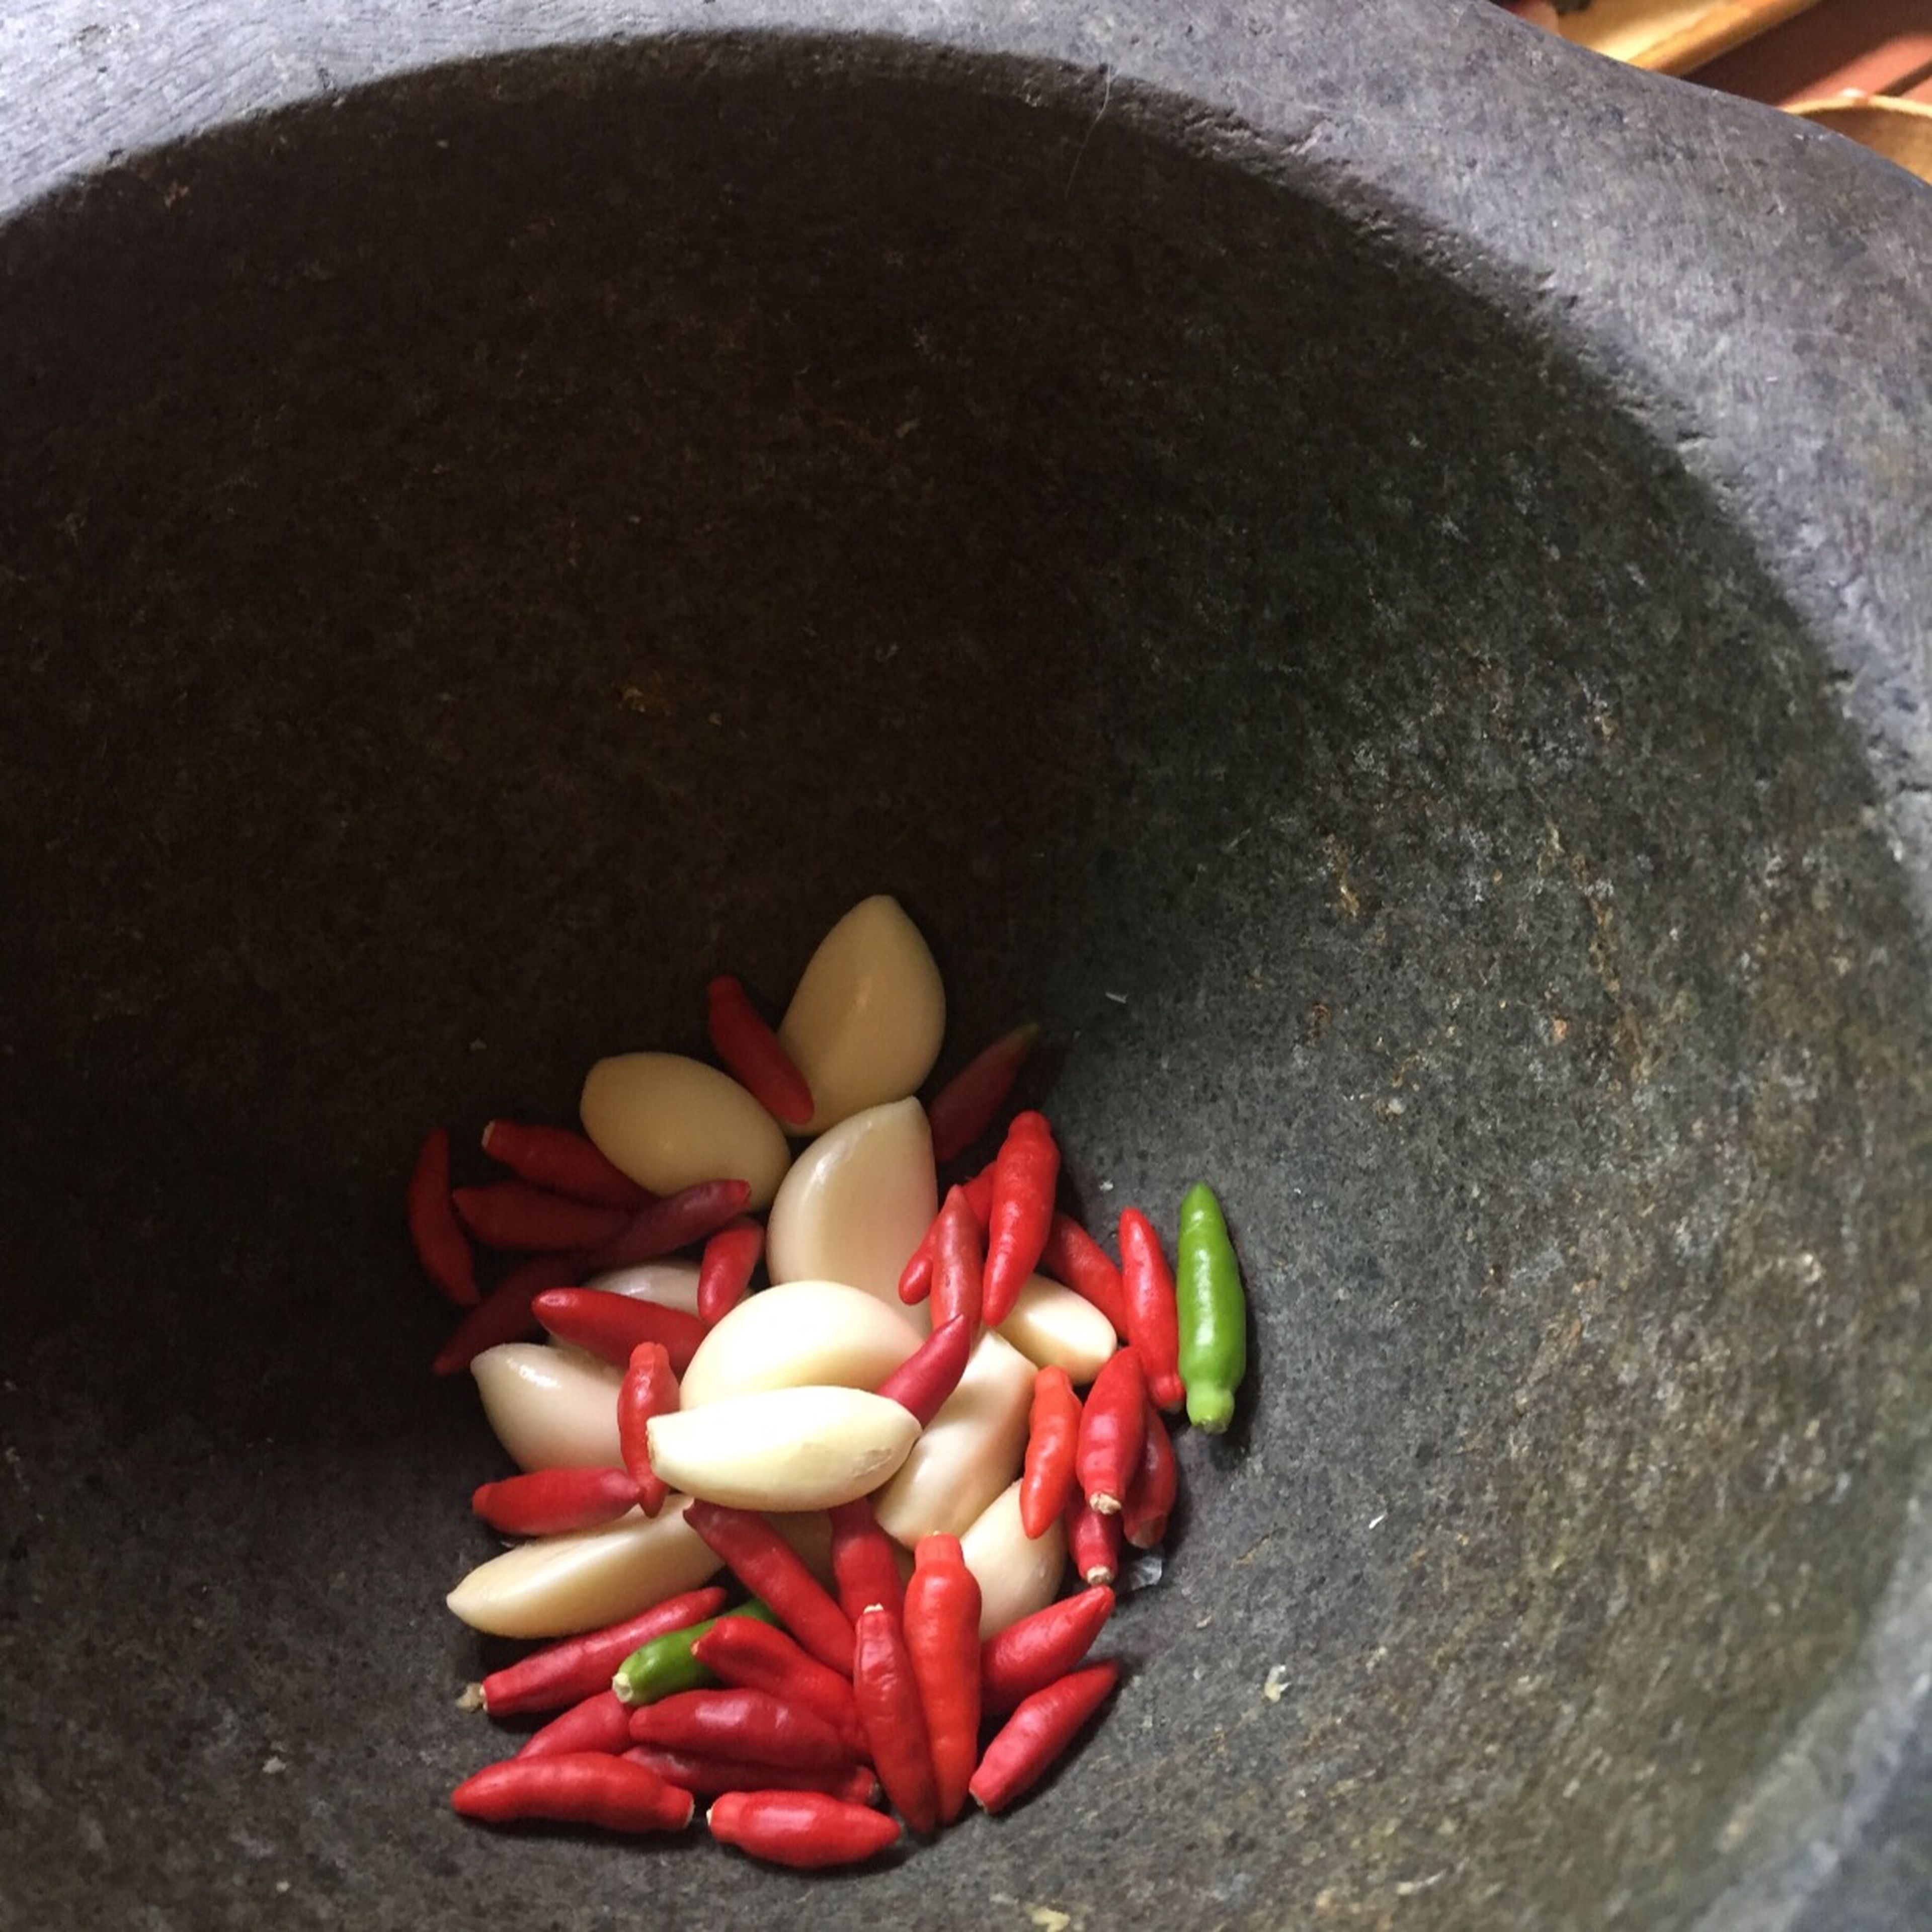 Use a mortar and pestle to pound the garlic and chilies paste. Set a side for later.